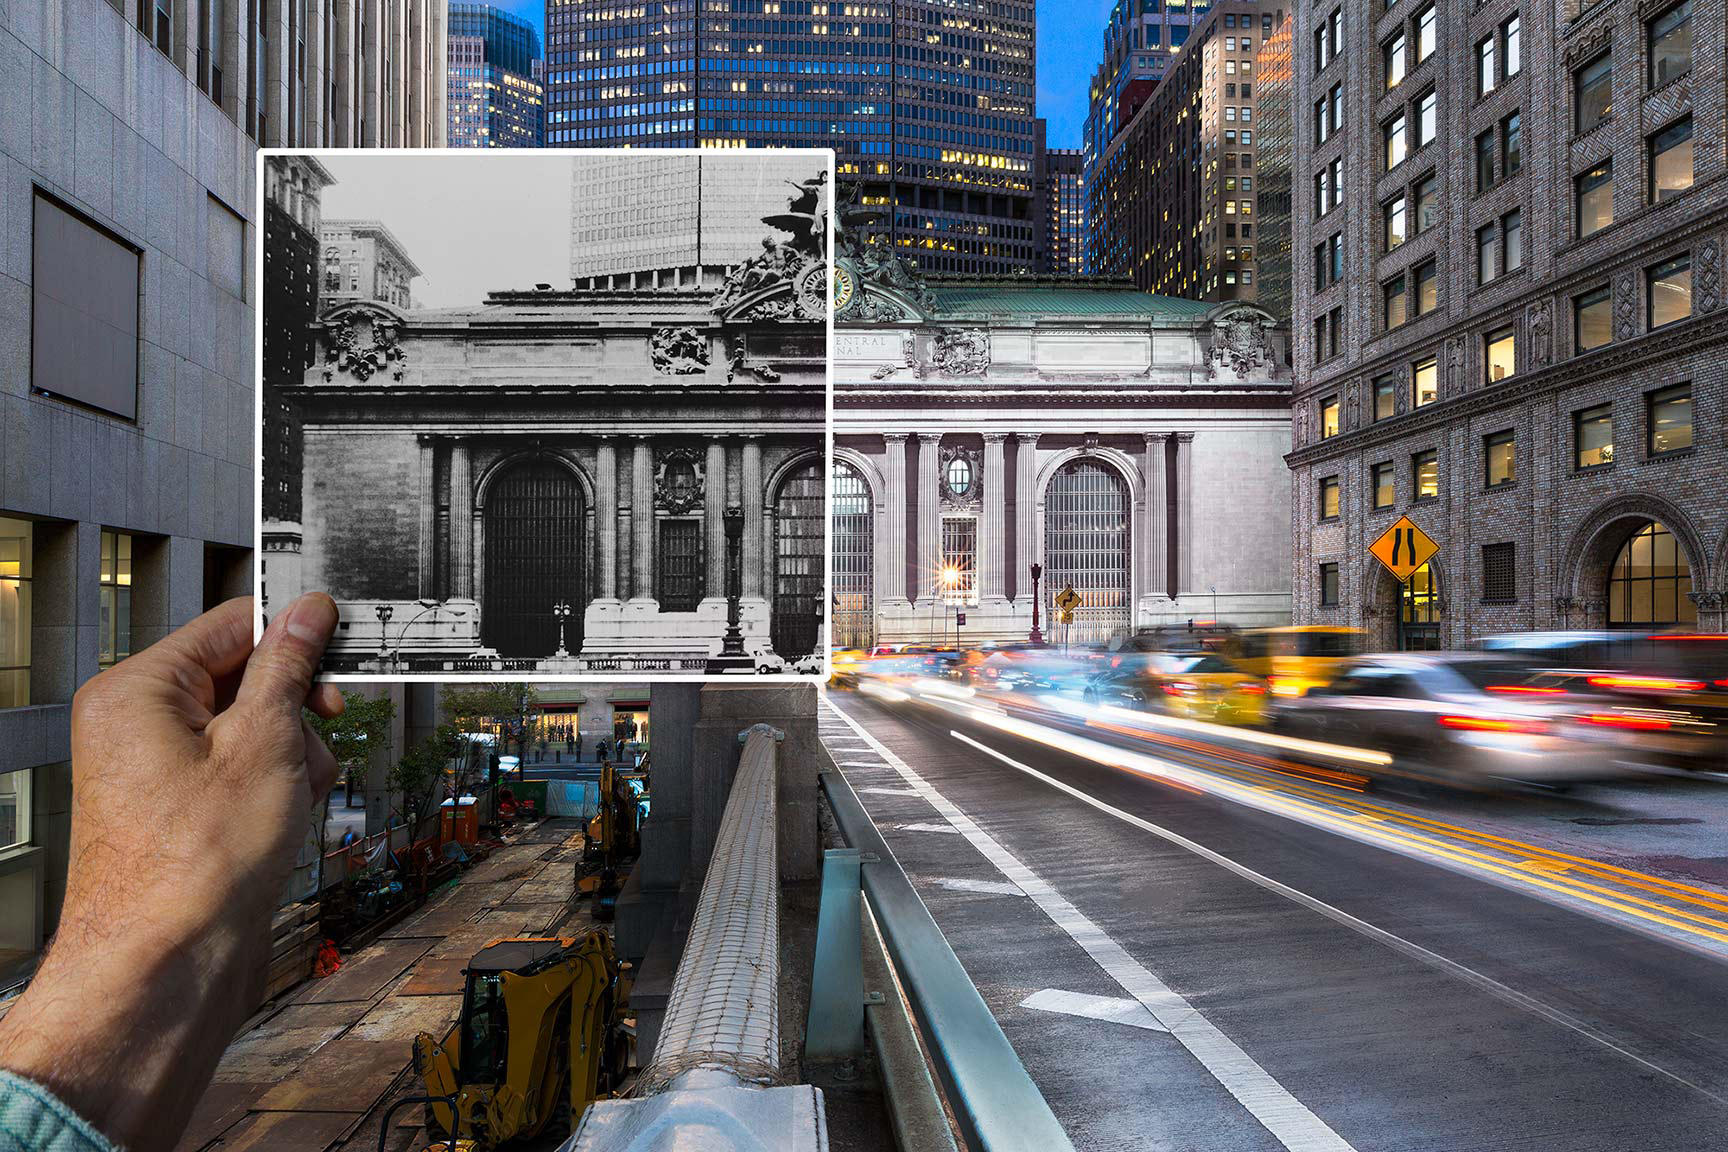 PROSOCO INTERNATIONAL did the cleaning of the Grand Central Terminal facade.  The client sent me a photo copy of the GCT from the 1960's. I held up the photo while on the shoot to show the before and after completed in 2016. The final image seen here was taken over a period of over 6 hours to capture various lighting conditions at different times during the day and evening. : Miscellanous Projects : New York NY Architectural Photographer | Interior and Exterior